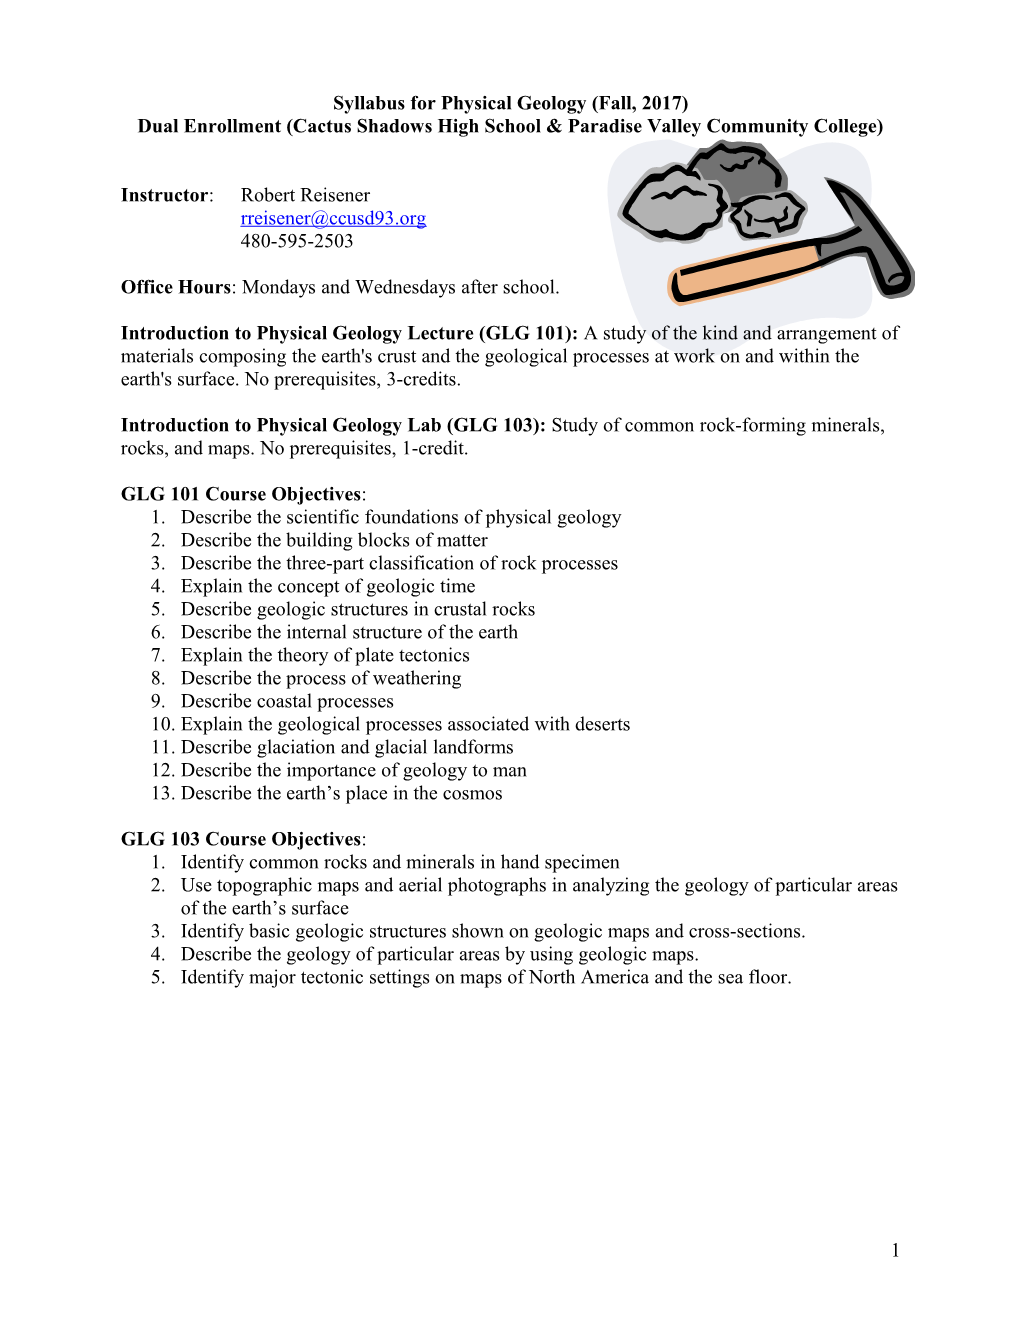 Syllabus For Physical Geology (Glg101) And Lab (Glg103)